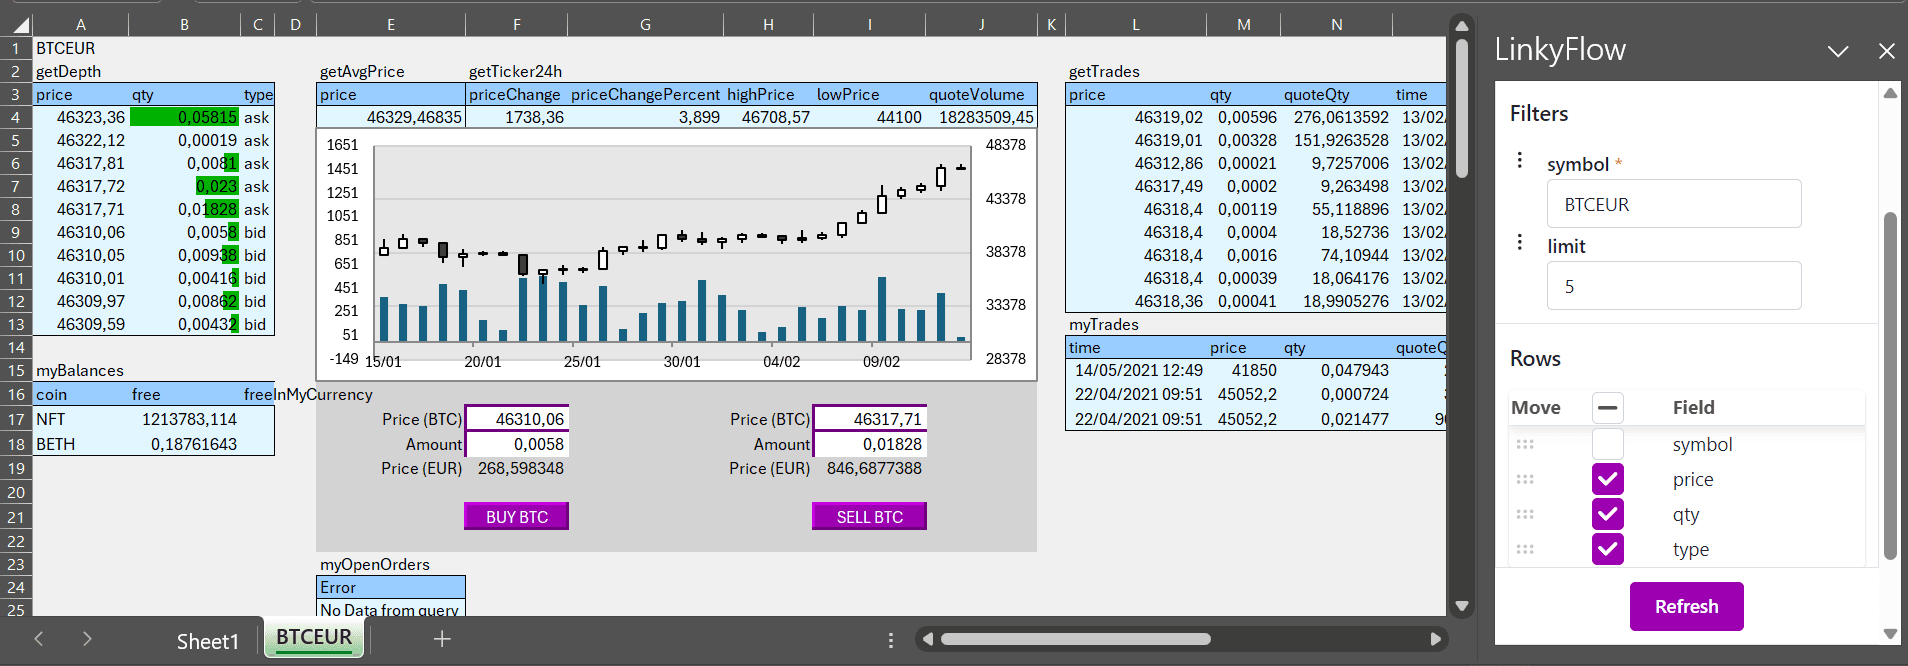 Get data and create trading crypto order from Excel